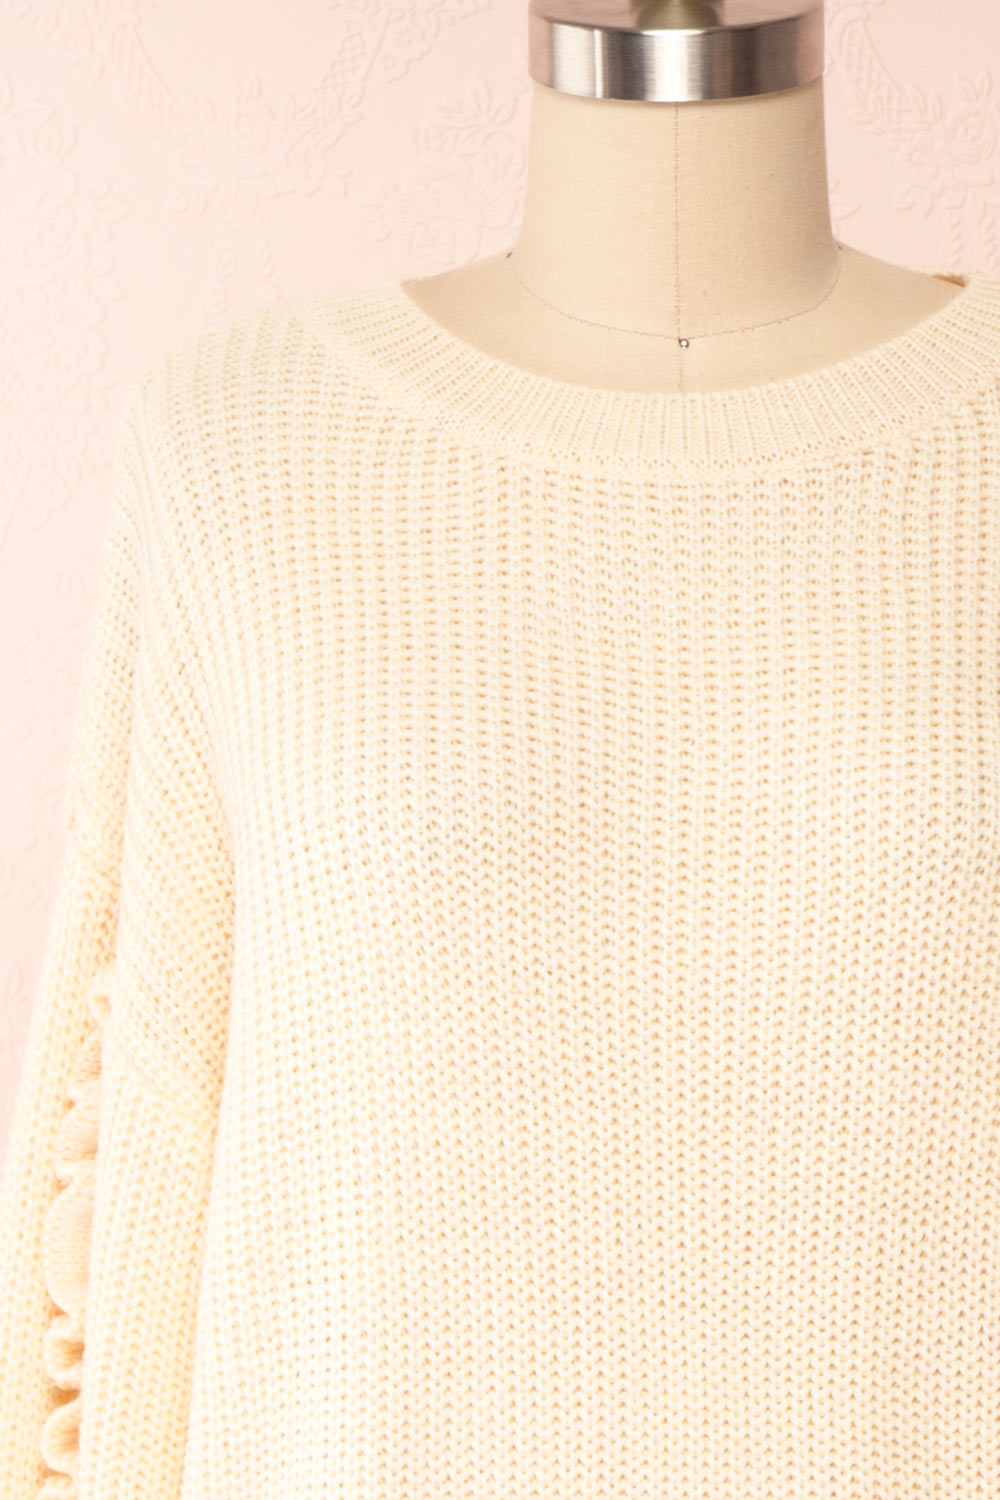 Idelle Ivory Knit Sweater w/ Frills on Sleeves | Boutique 1861 front close-up